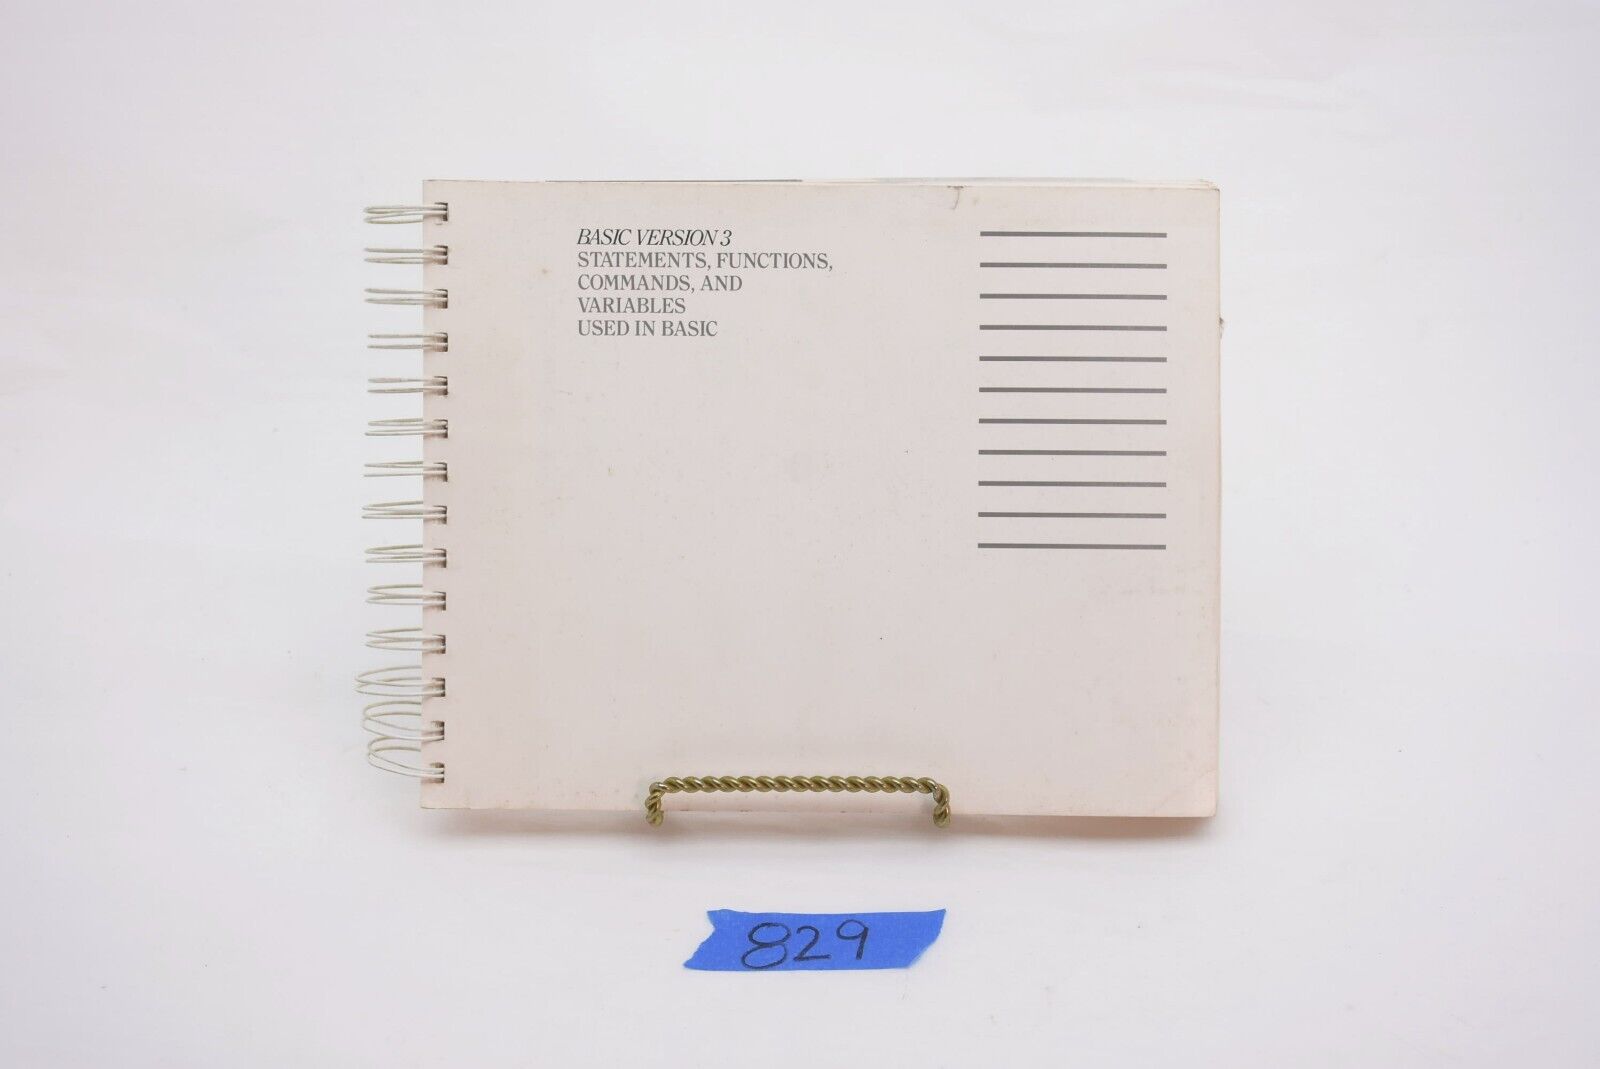 Compaq BASIC Version 3 Reference Guide 1985 1st Edition